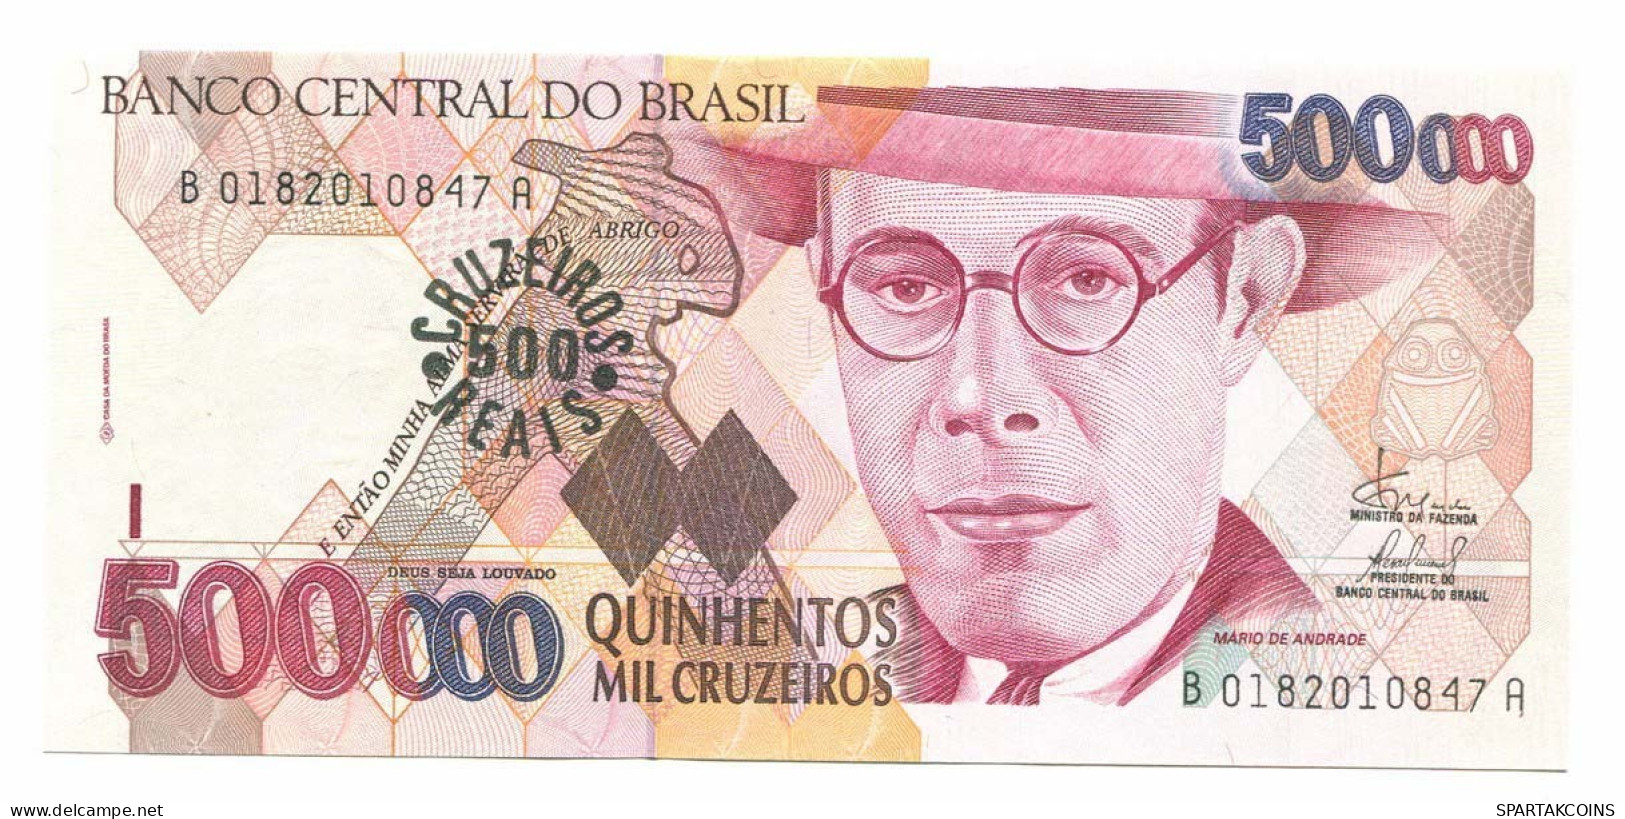 BRASIL 500000 CRUZEIROS 1993 UNC Paper Money Banknote #P10893.4 - [11] Local Banknote Issues